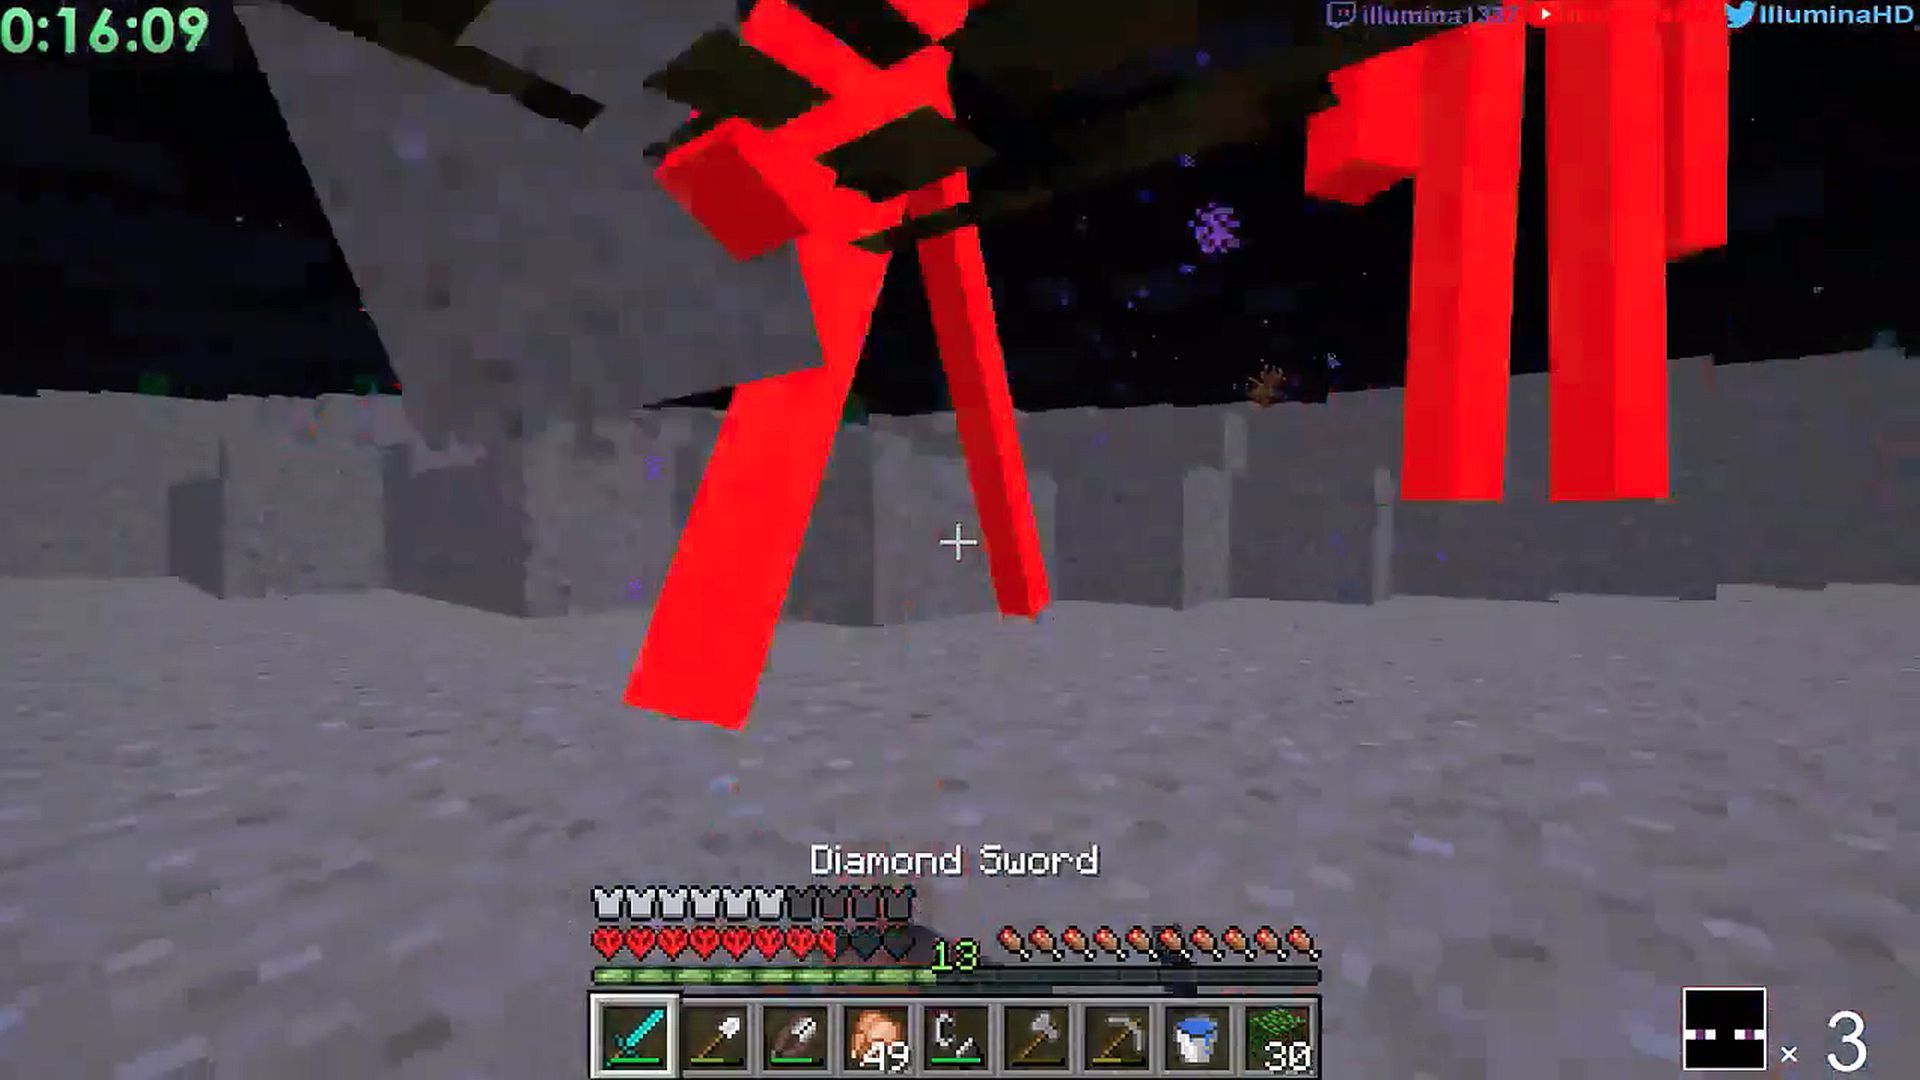 Co-op Minecraft speedrun drops the record under two minutes